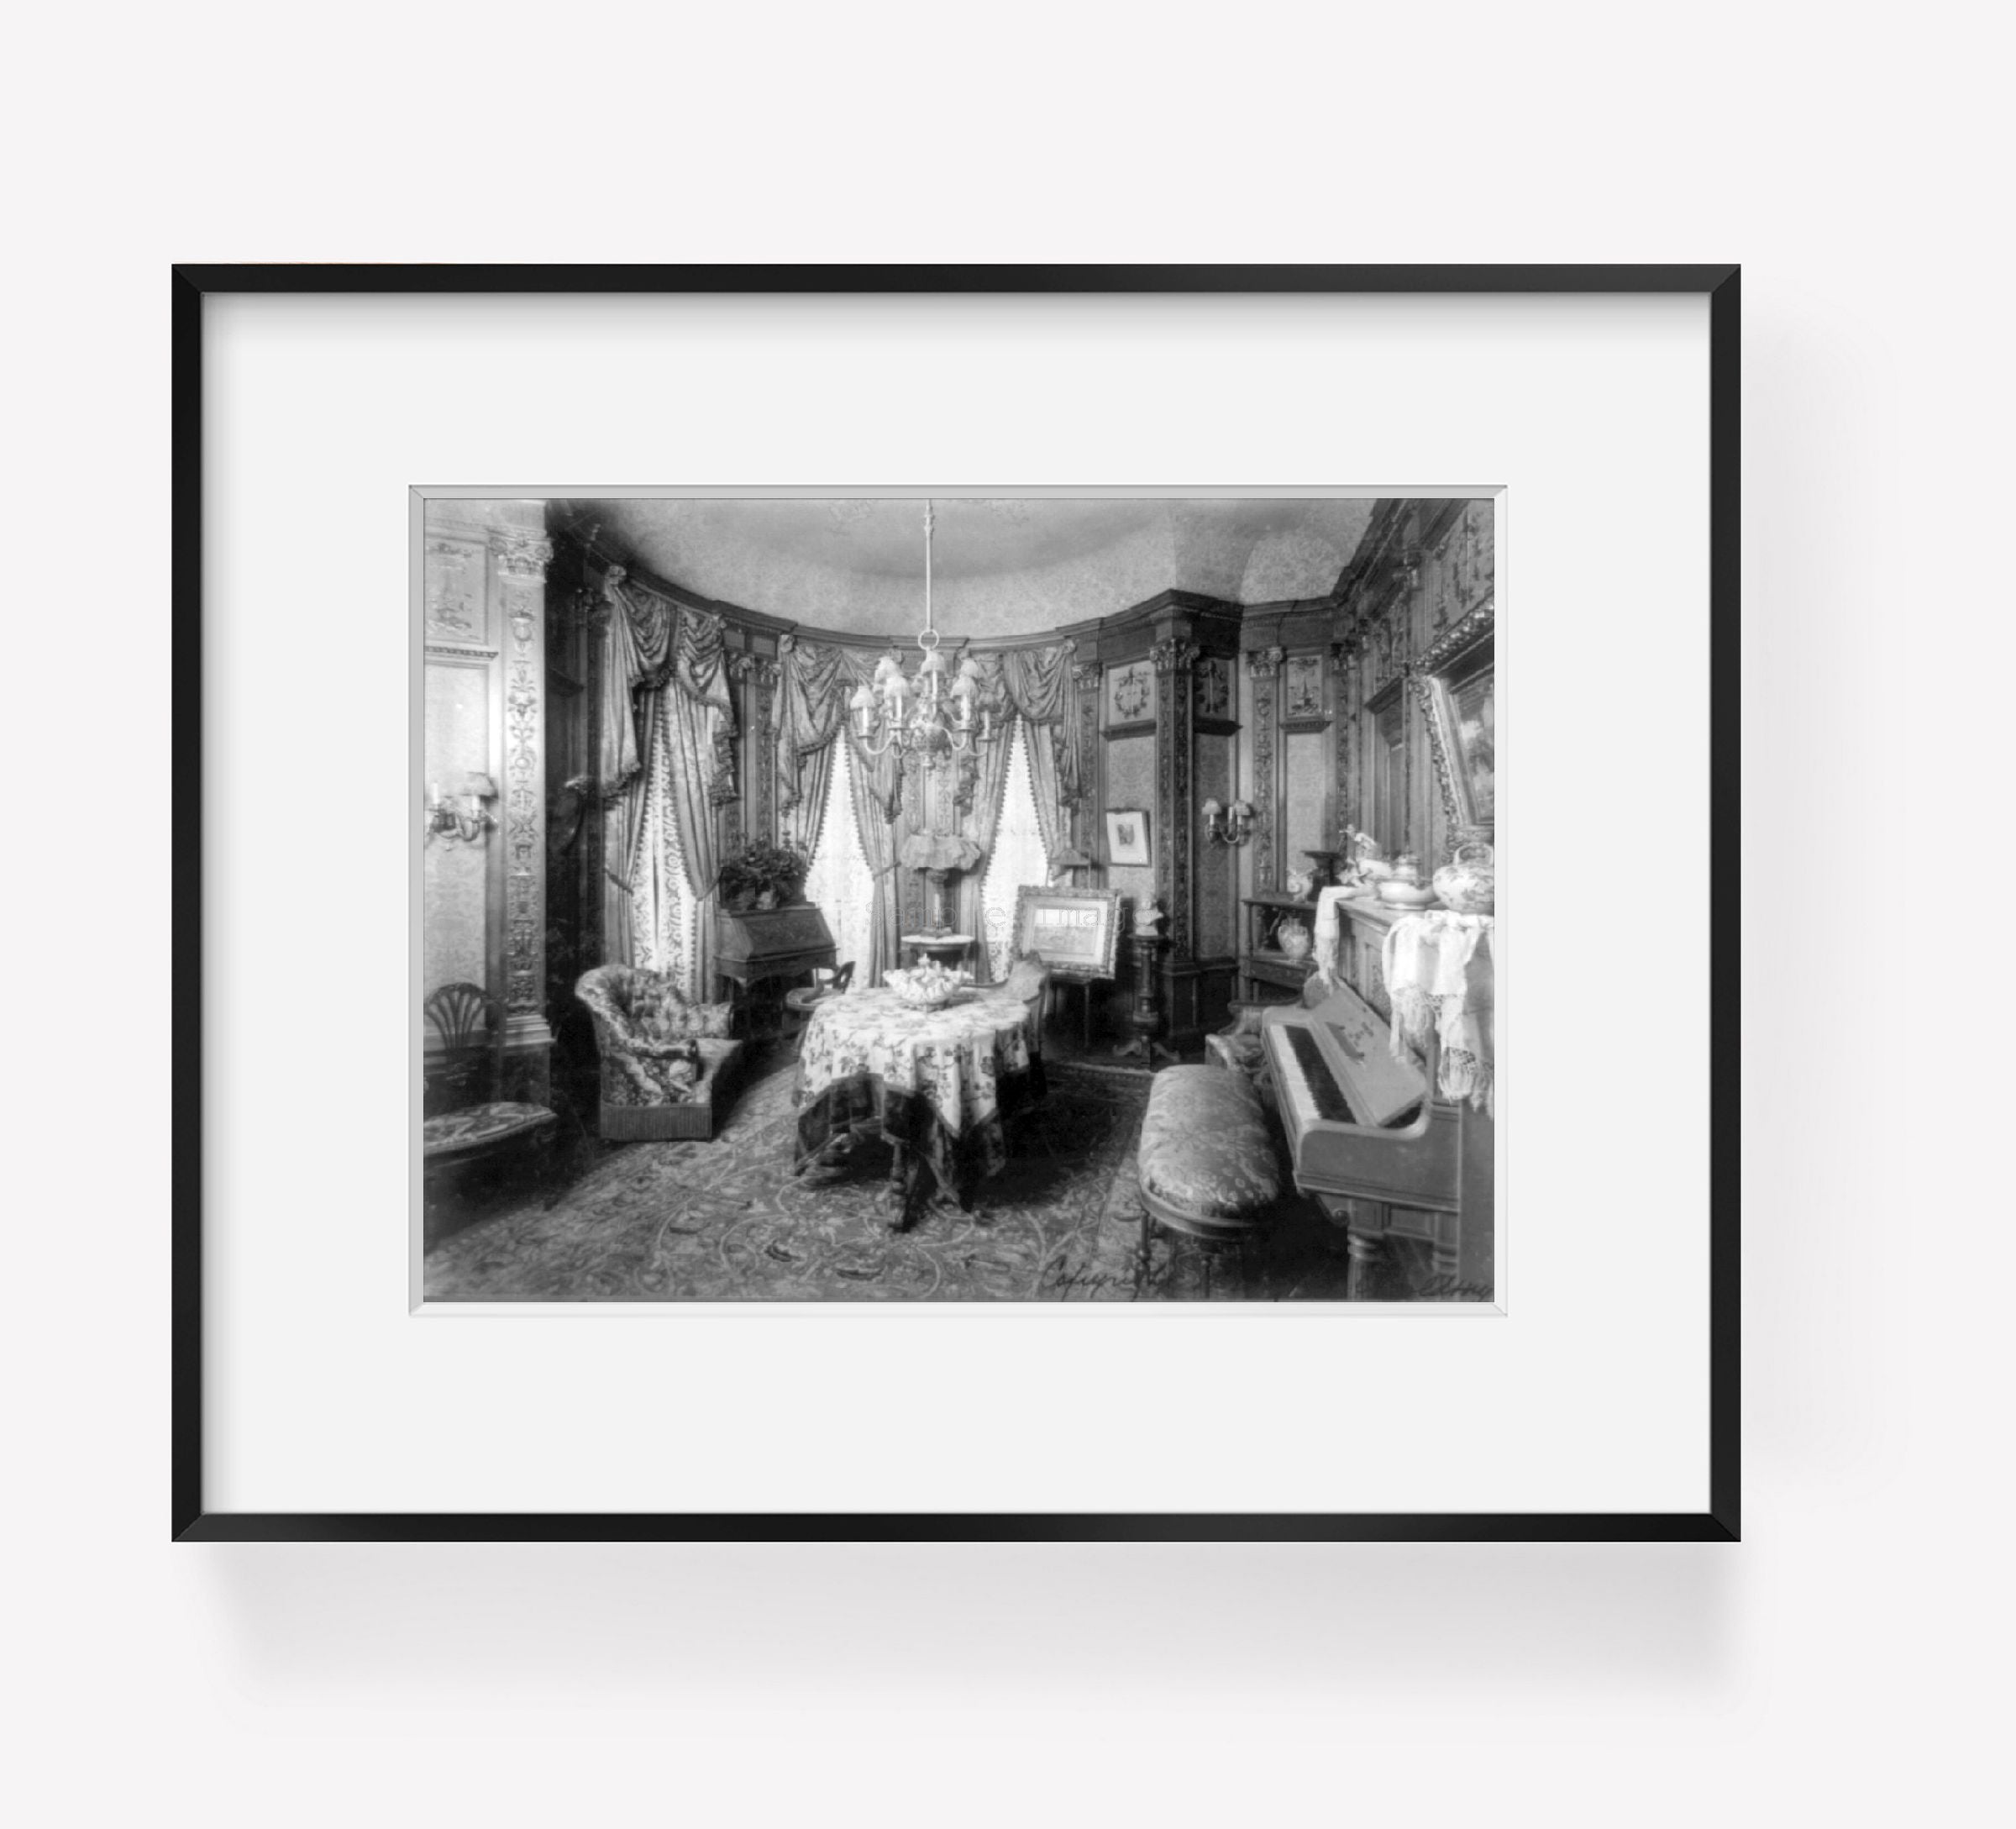 Photo: Room 210, July 24, 1902, piano, curtains, chandelier, tables, chairs